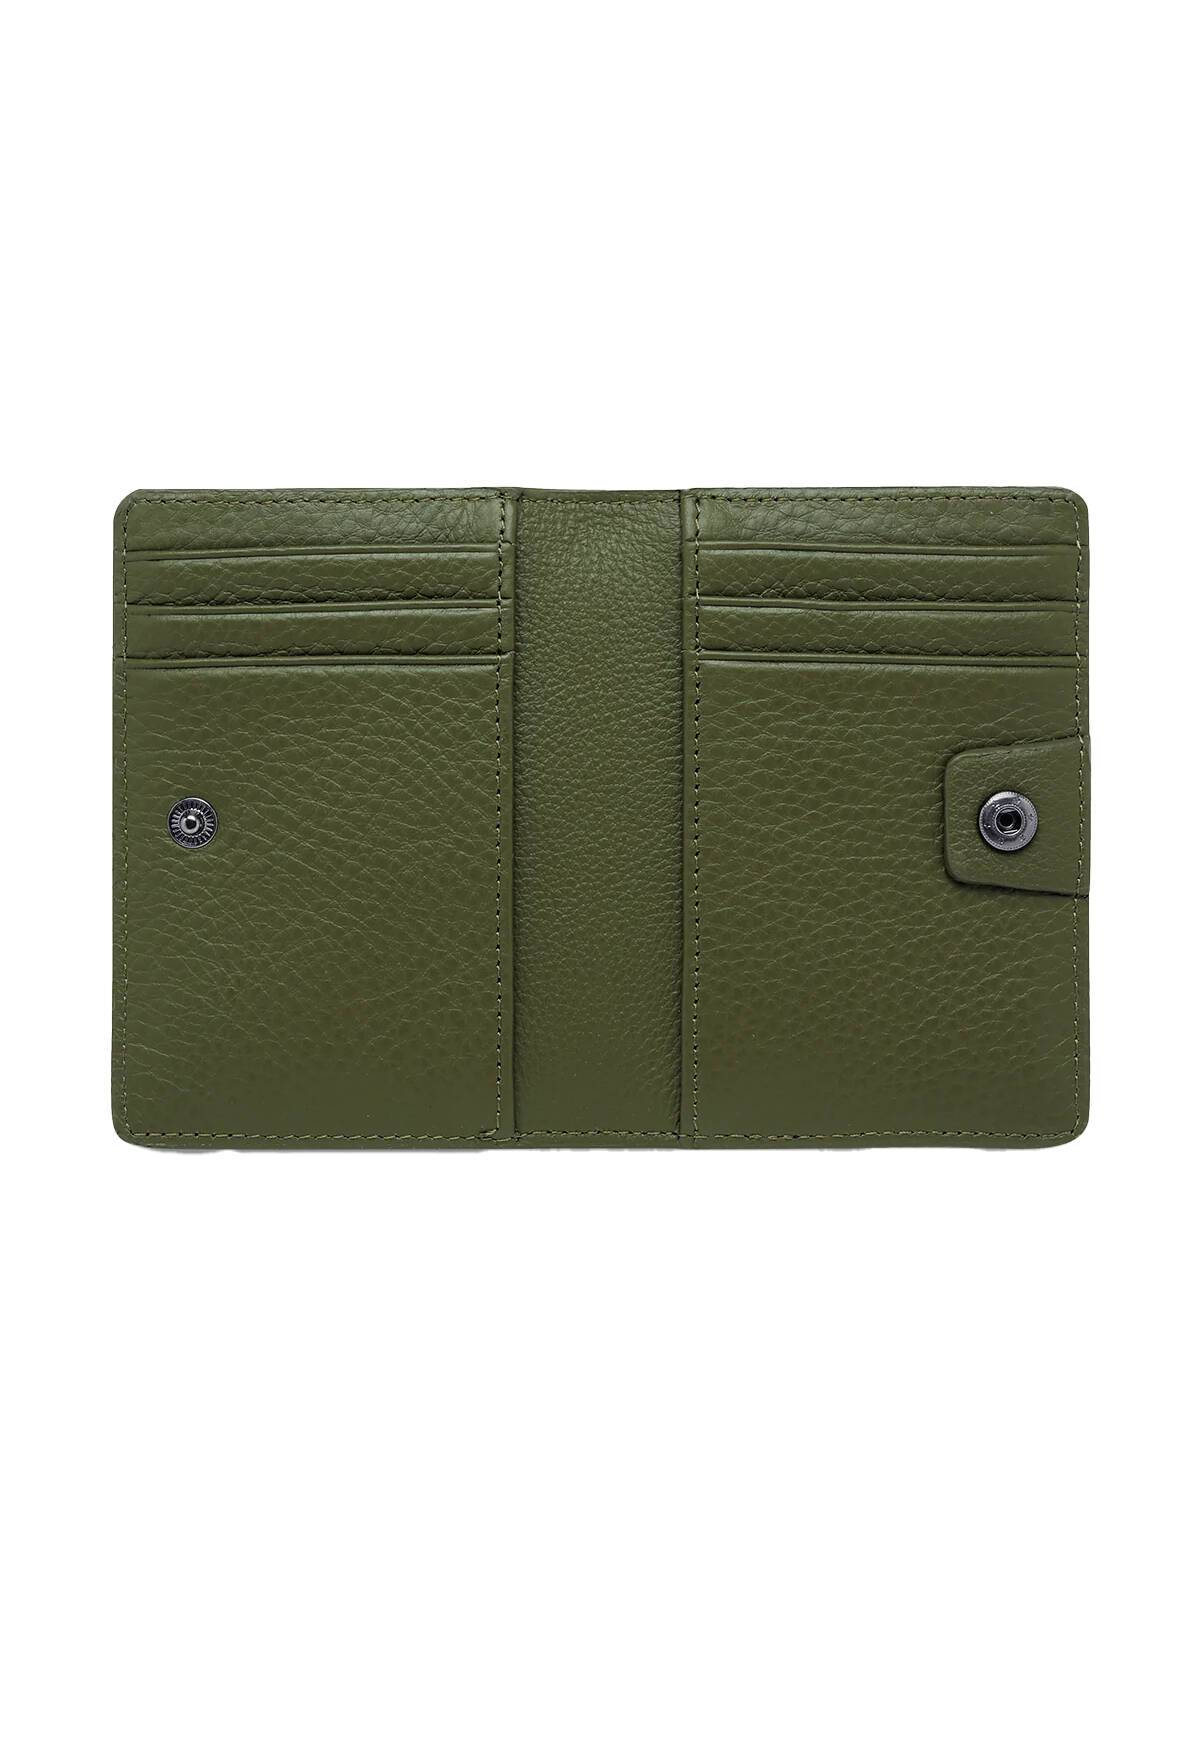 STATUS ANXIETY EASY DOES IT WALLET - Womens-Accessories : Soul